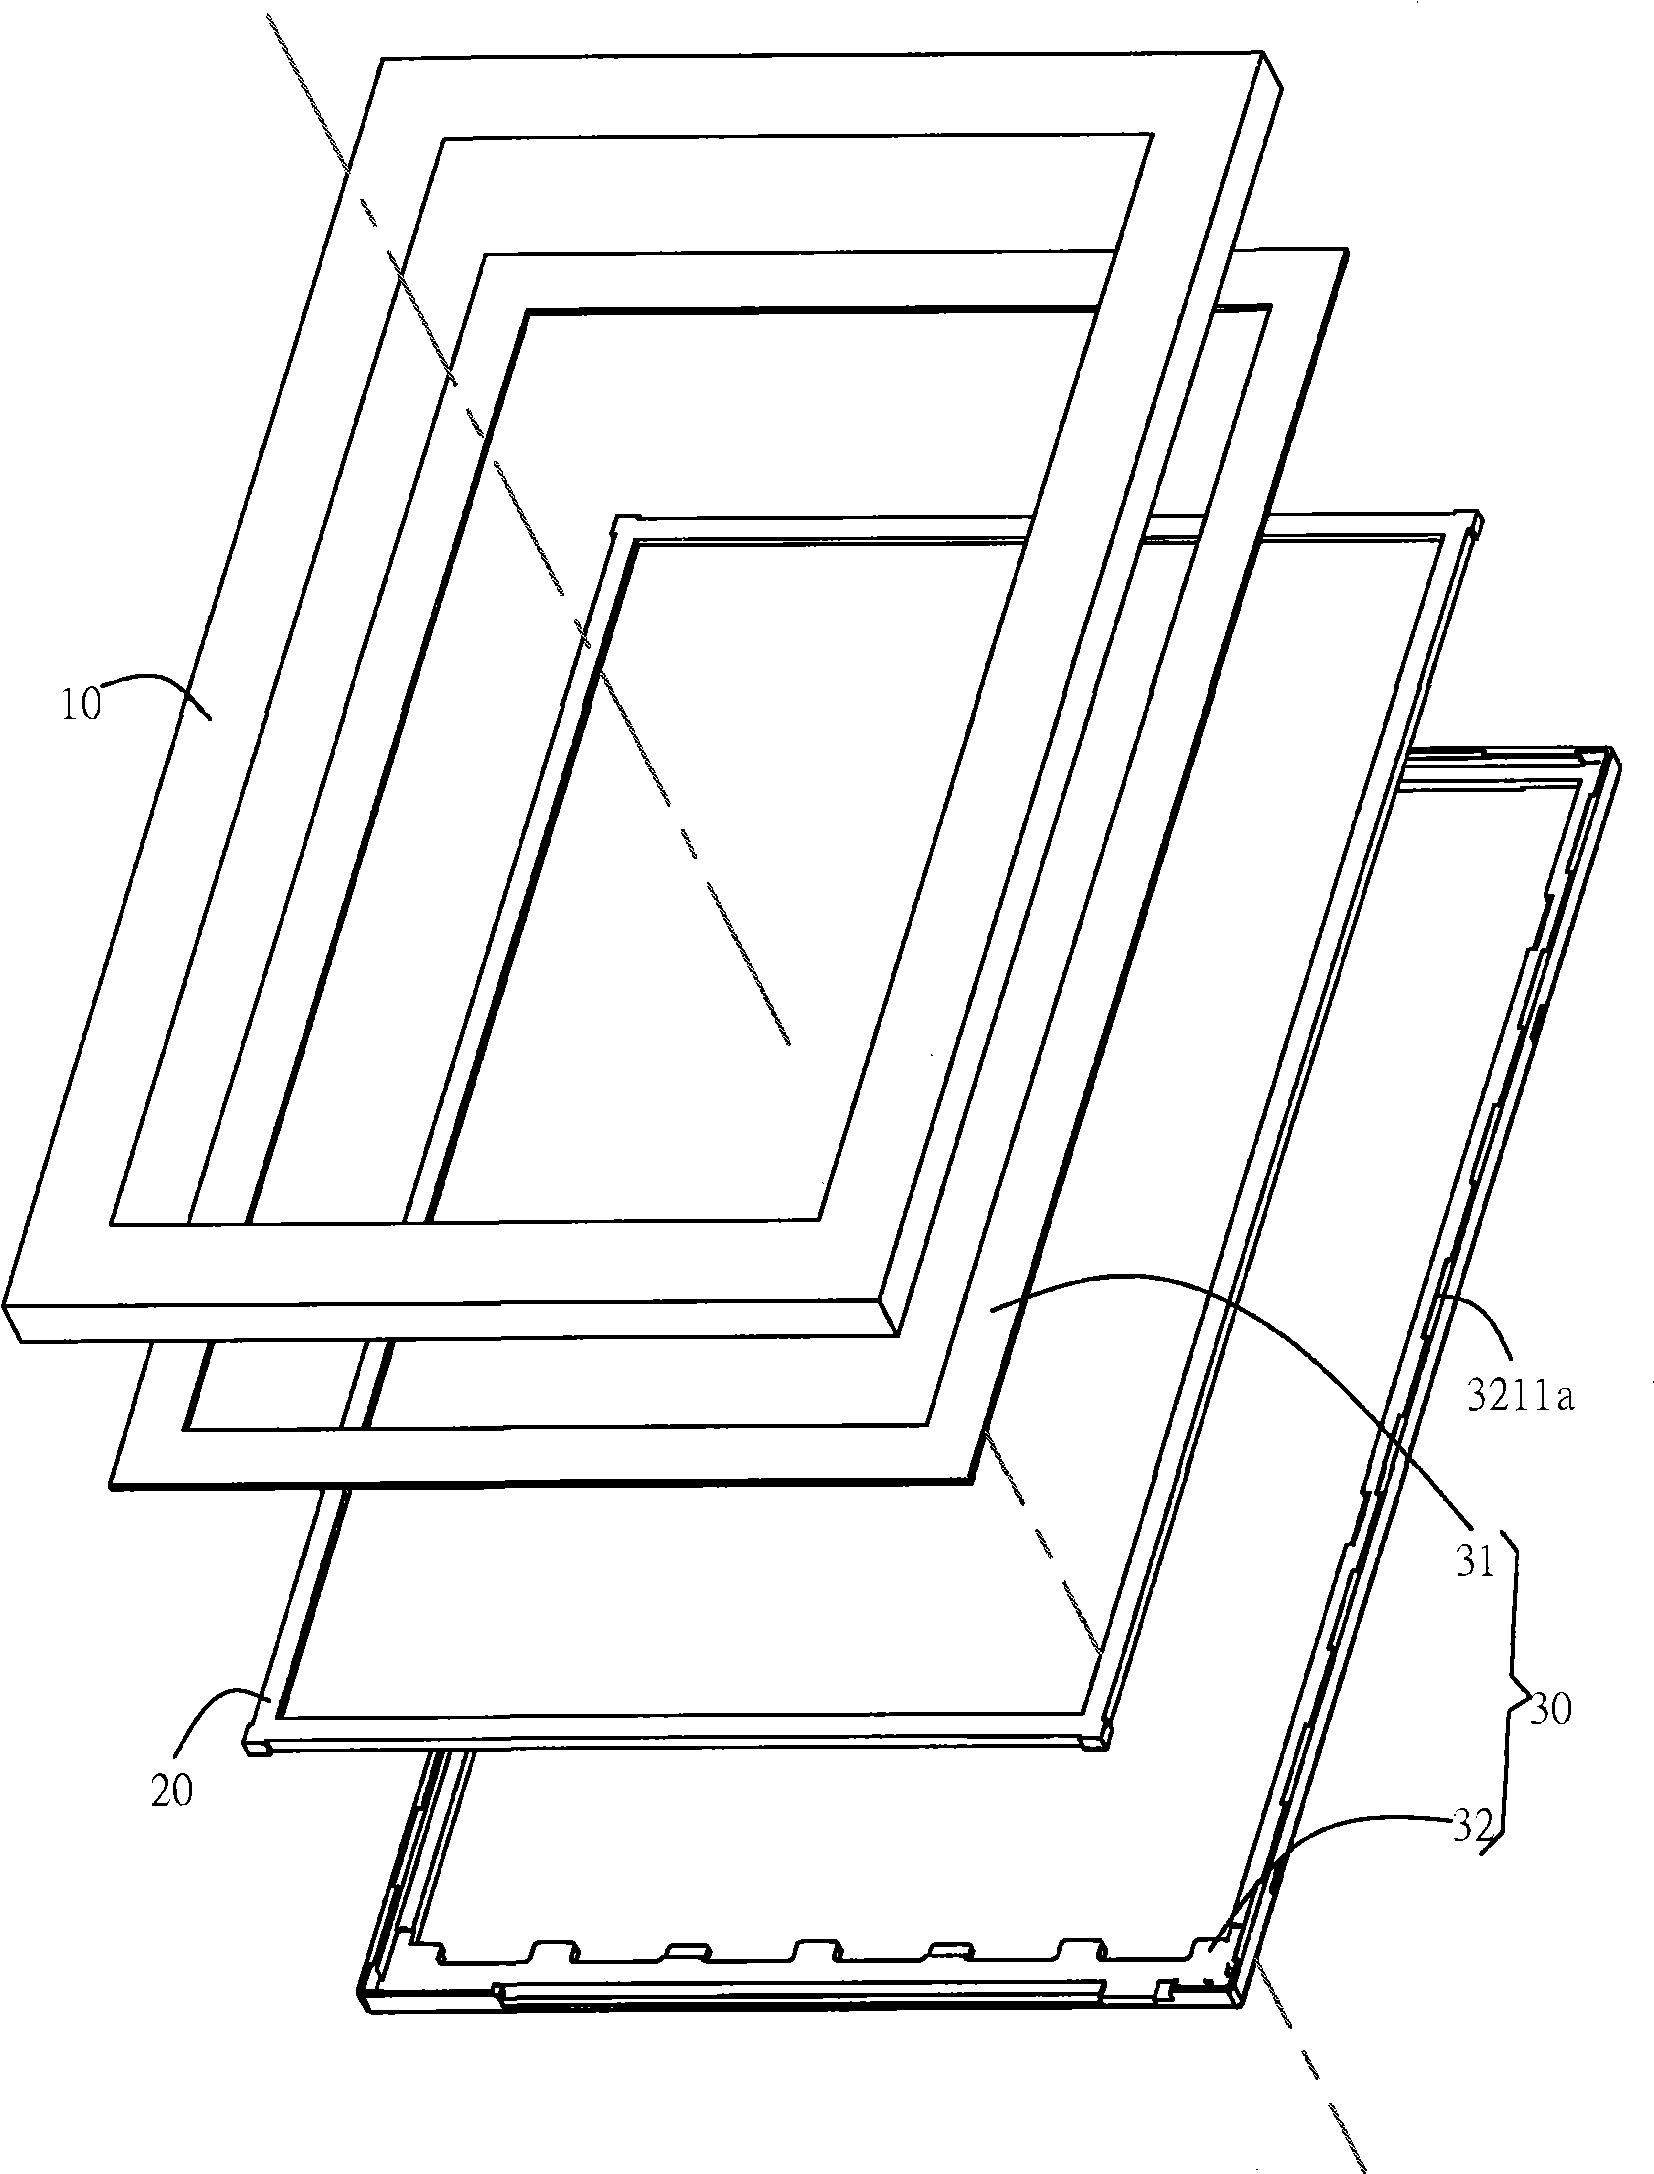 Plane display device, its combined outer frame and manufacturing method